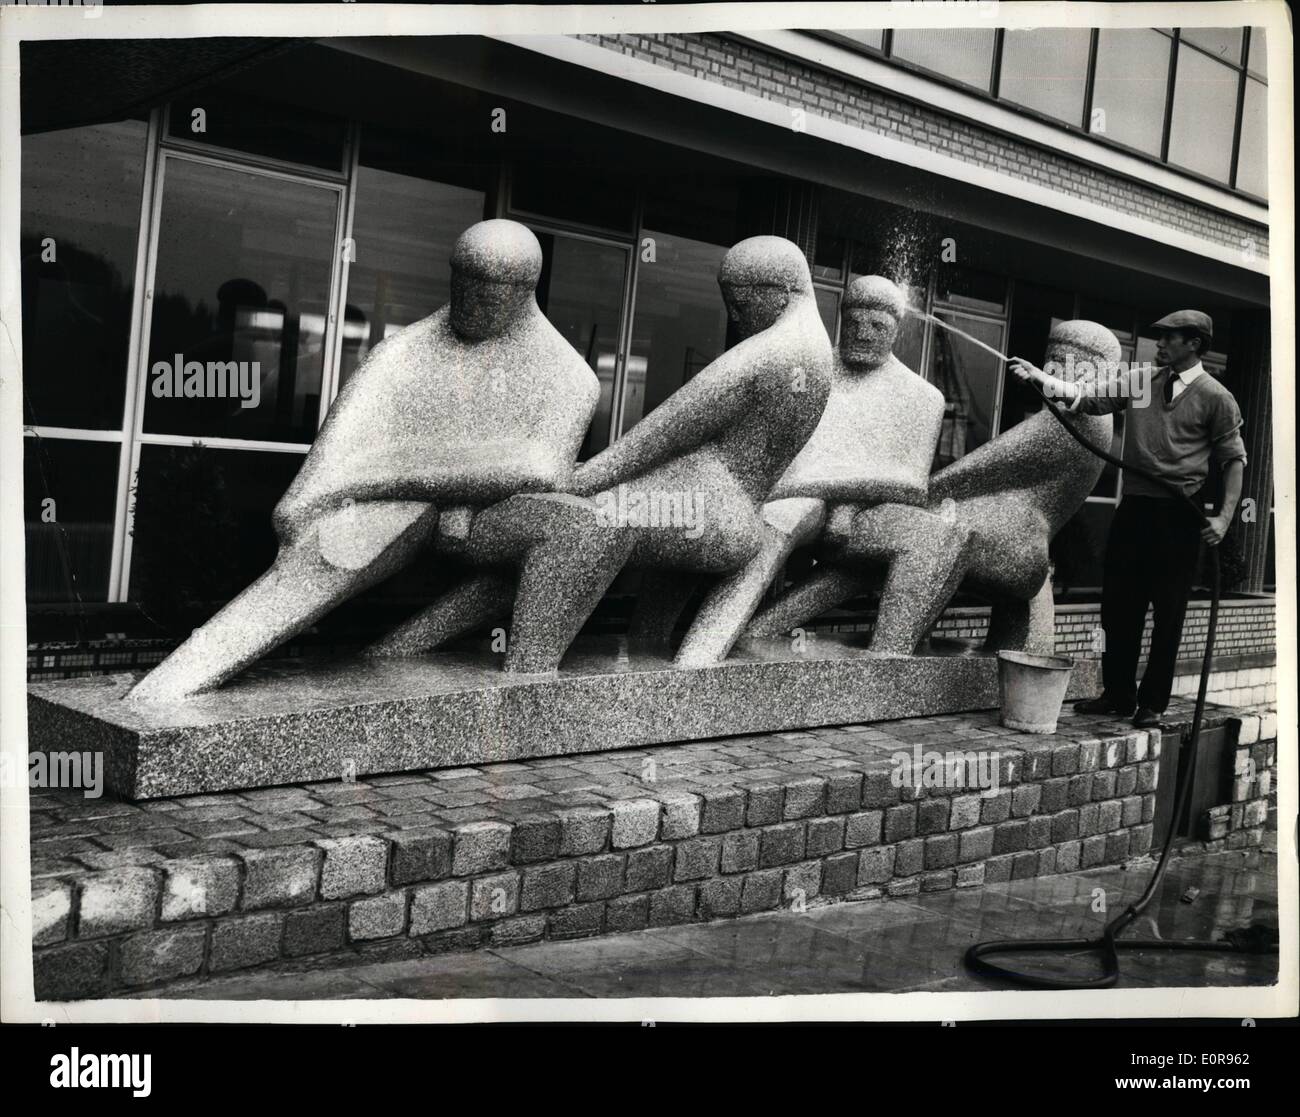 Oct. 10, 1958 - Ten-Ton ''Teamwork'' sculpture; ''Teamwork'' a huge ten-ton granite sculpture by Mr. David Wynne, was this morning put into position outside ''Western House'', Ealing, the new headquarters of the overseas companies within the Taylow Woodrow Group of building and civil engineering concerns, where it is to be unveiled on Monday. The sculpture, which depicts four men pulling one rope, was shaped from a 100 ton rock dynamited from a quarry in Falmouth. Photo Shows The sculpture, Mr. David Wynne, hosing down the sculpture, after it had been placed into position today. Stock Photo